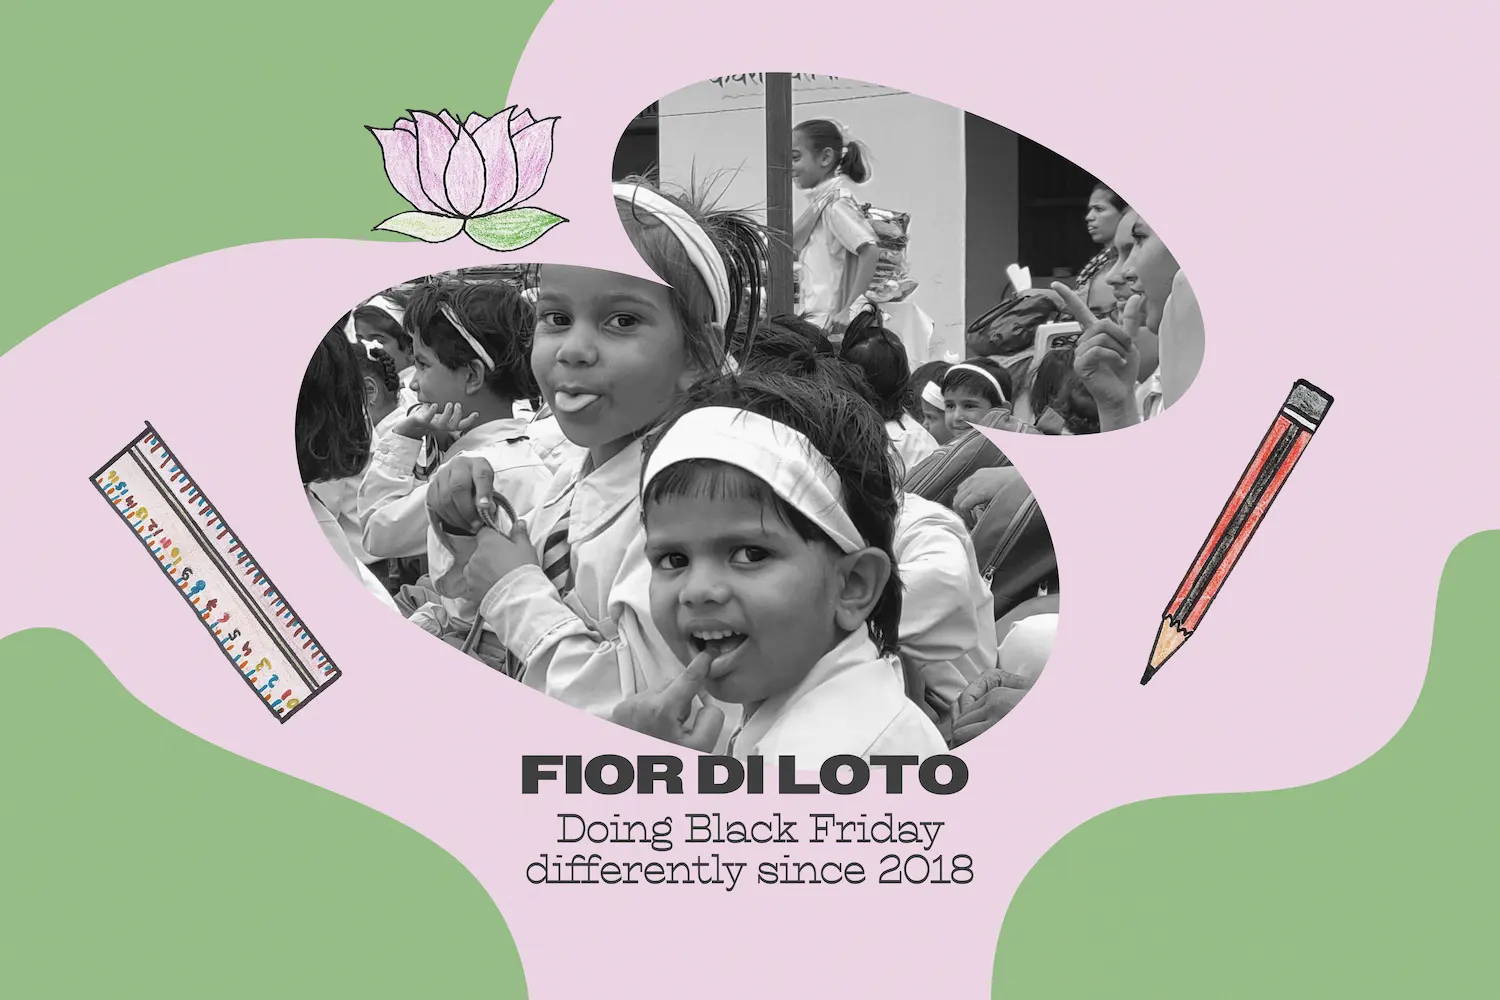 black and white photo of young girls surrounded by a pink and green graphic with illustrations of a flower, a ruler and a pencil. The text says, "FIOR DI LOTO Doing Black Friday differently since 2018"